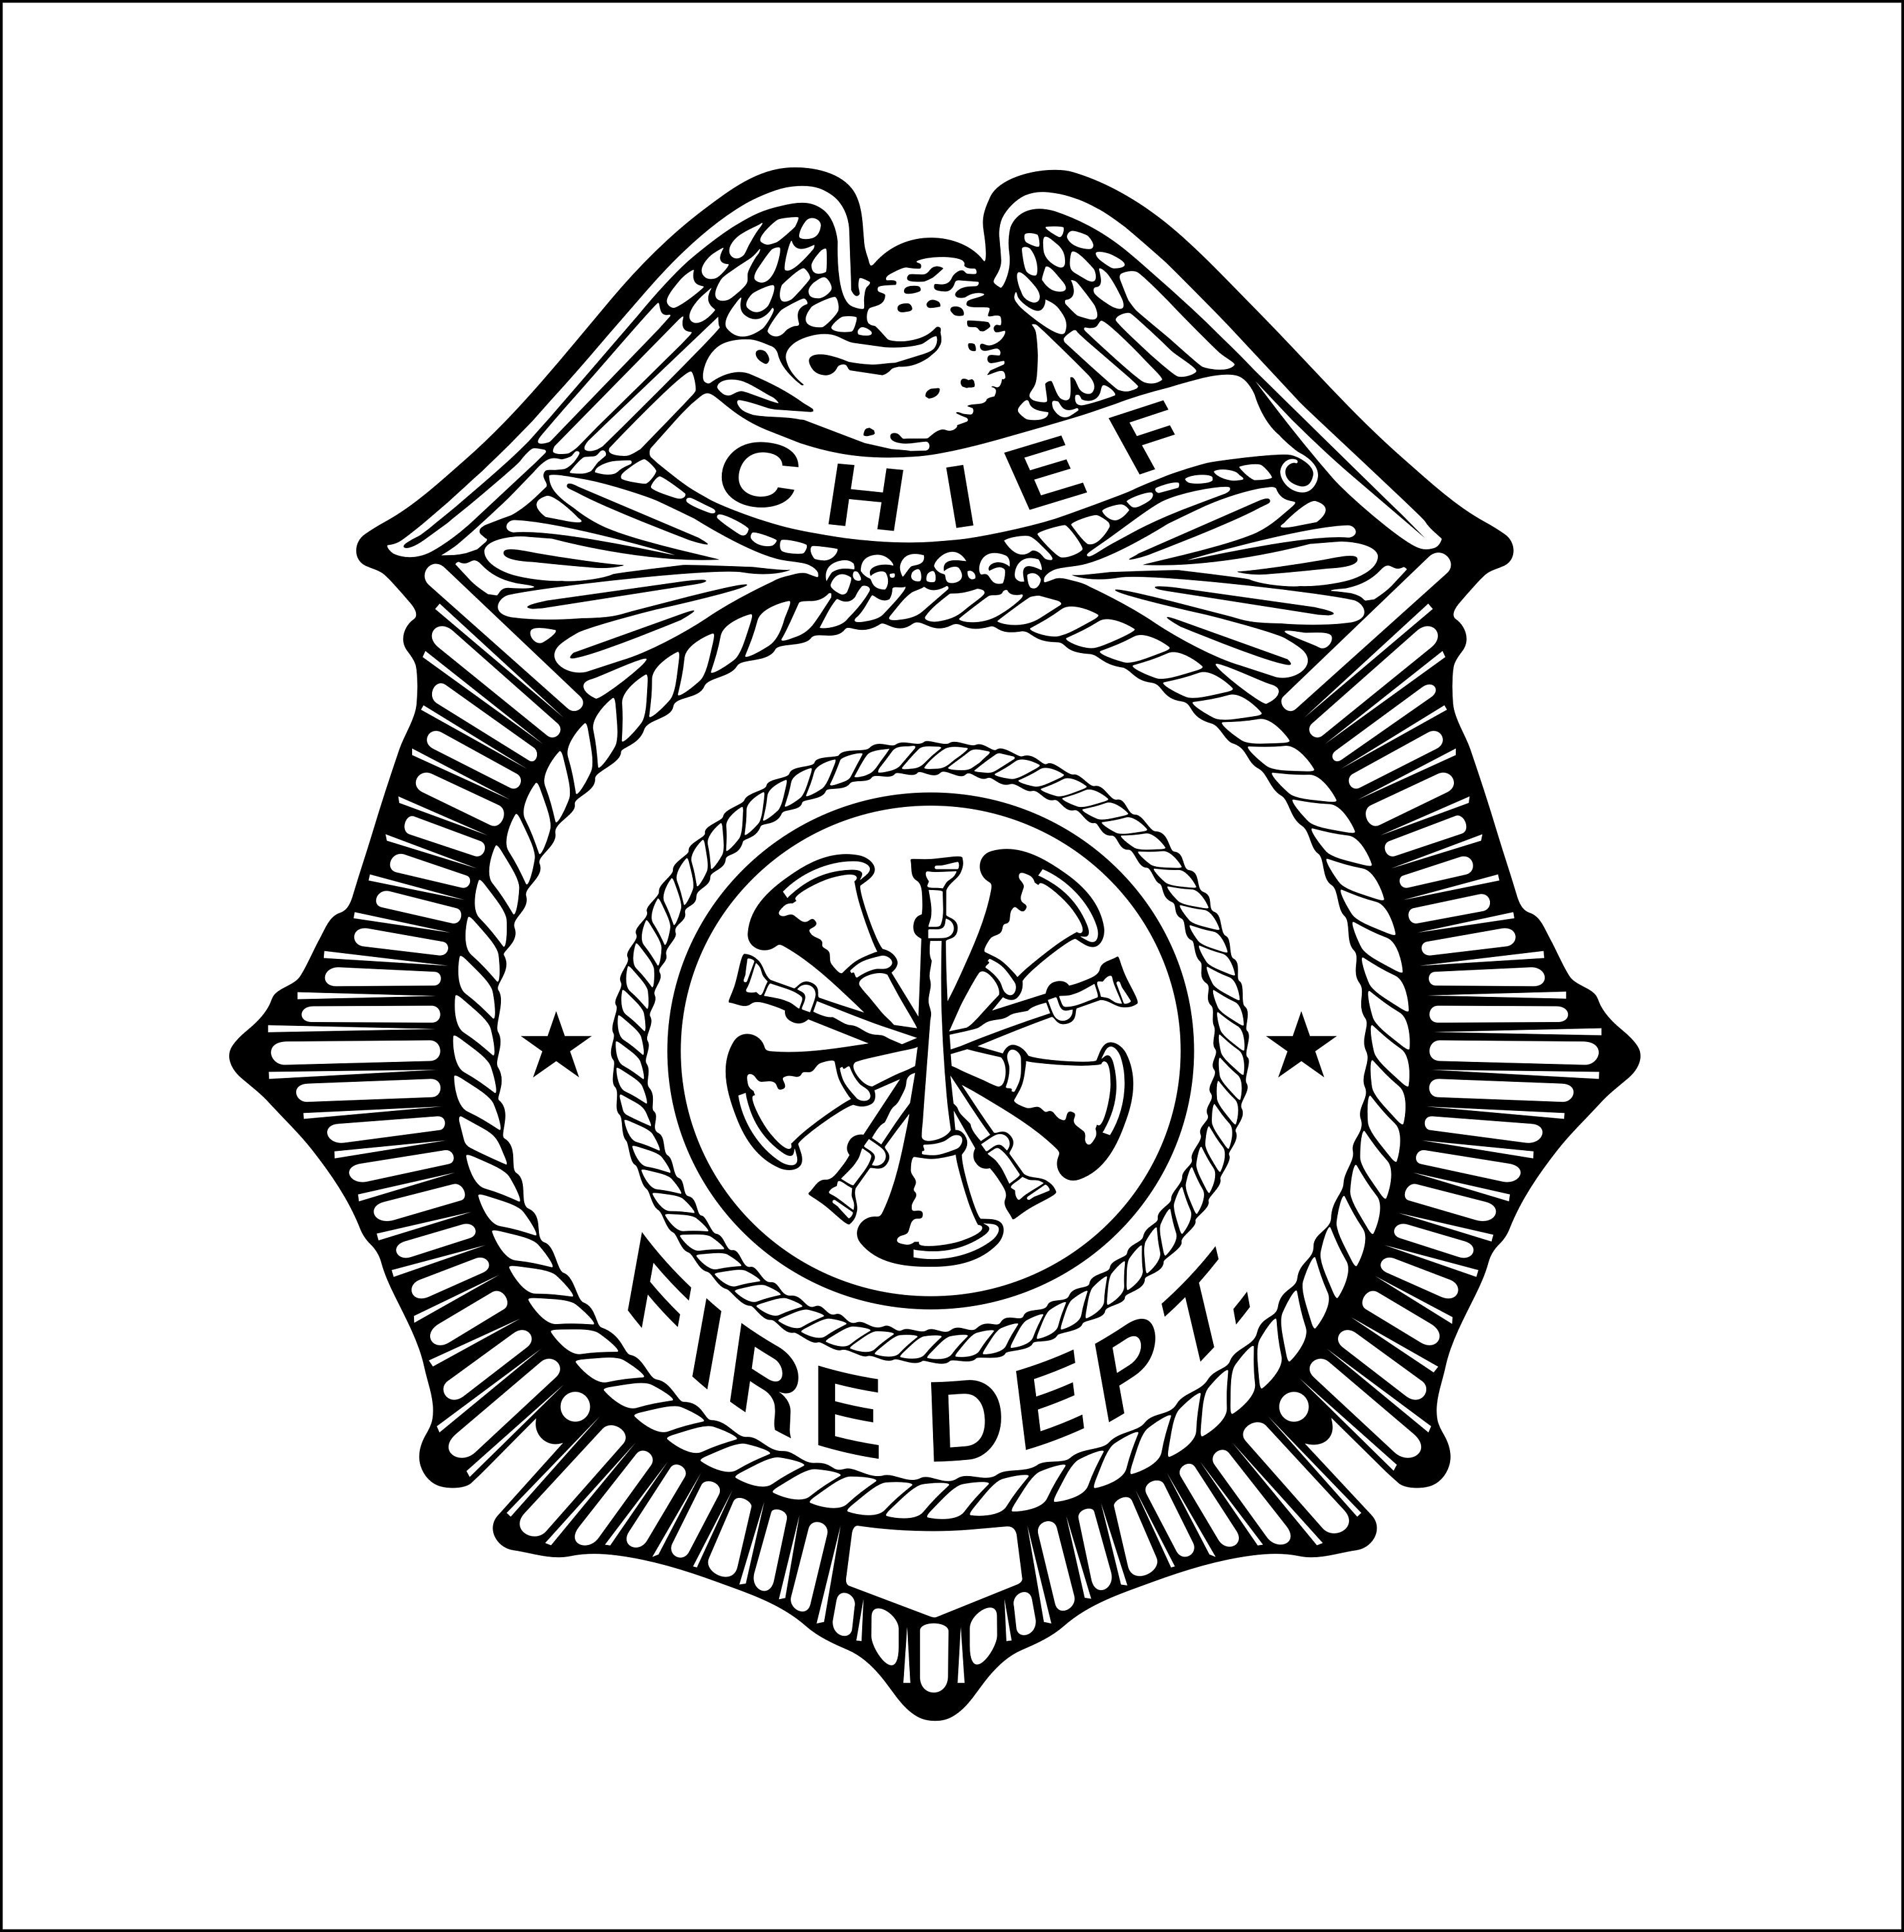 firefighter-chief-badge-fire-department-hero-honor-fireman-etsy